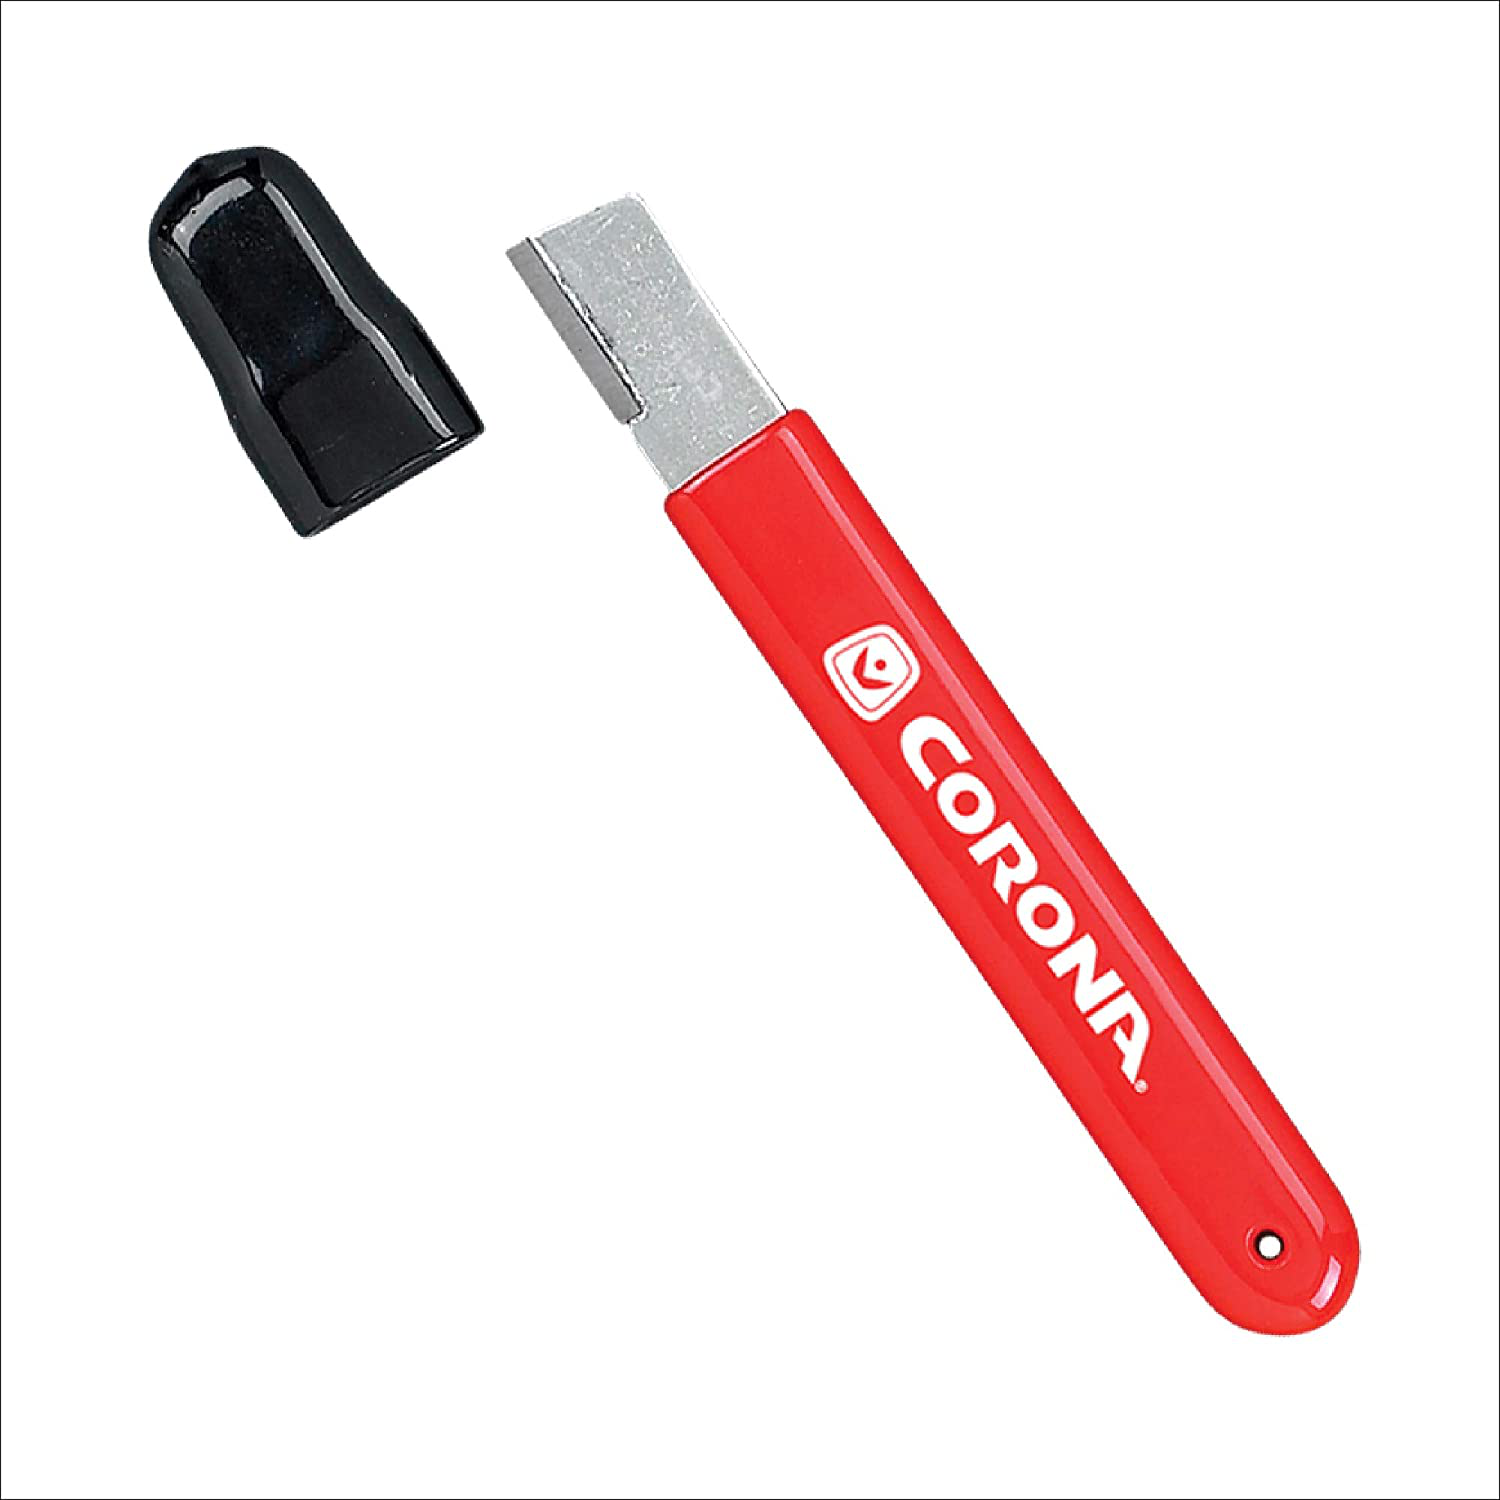 Corona AC 8300 Garden Tool Sales of SALE items from new works Basic Blade Pack Sharpener famous